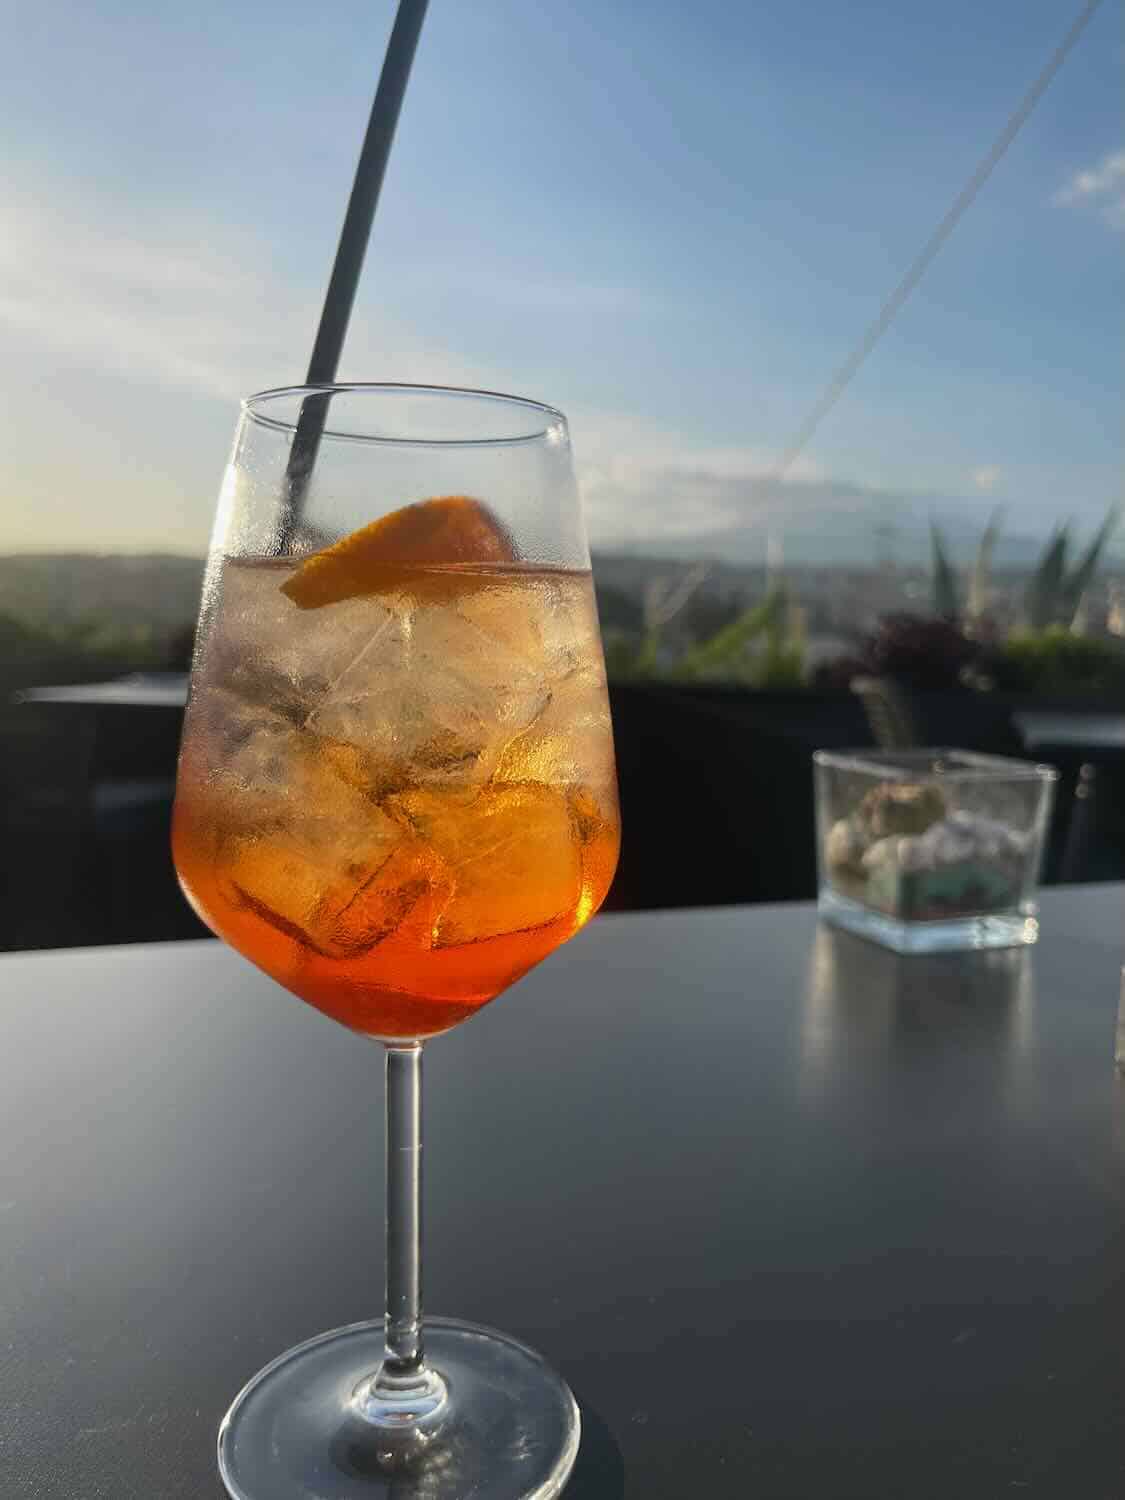 A photo of a glass of Aperol Spritz with ice and an orange slice, sitting on a table with a straw. The background shows an outdoor setting with a clear sky and distant hills, creating a relaxed atmosphere.